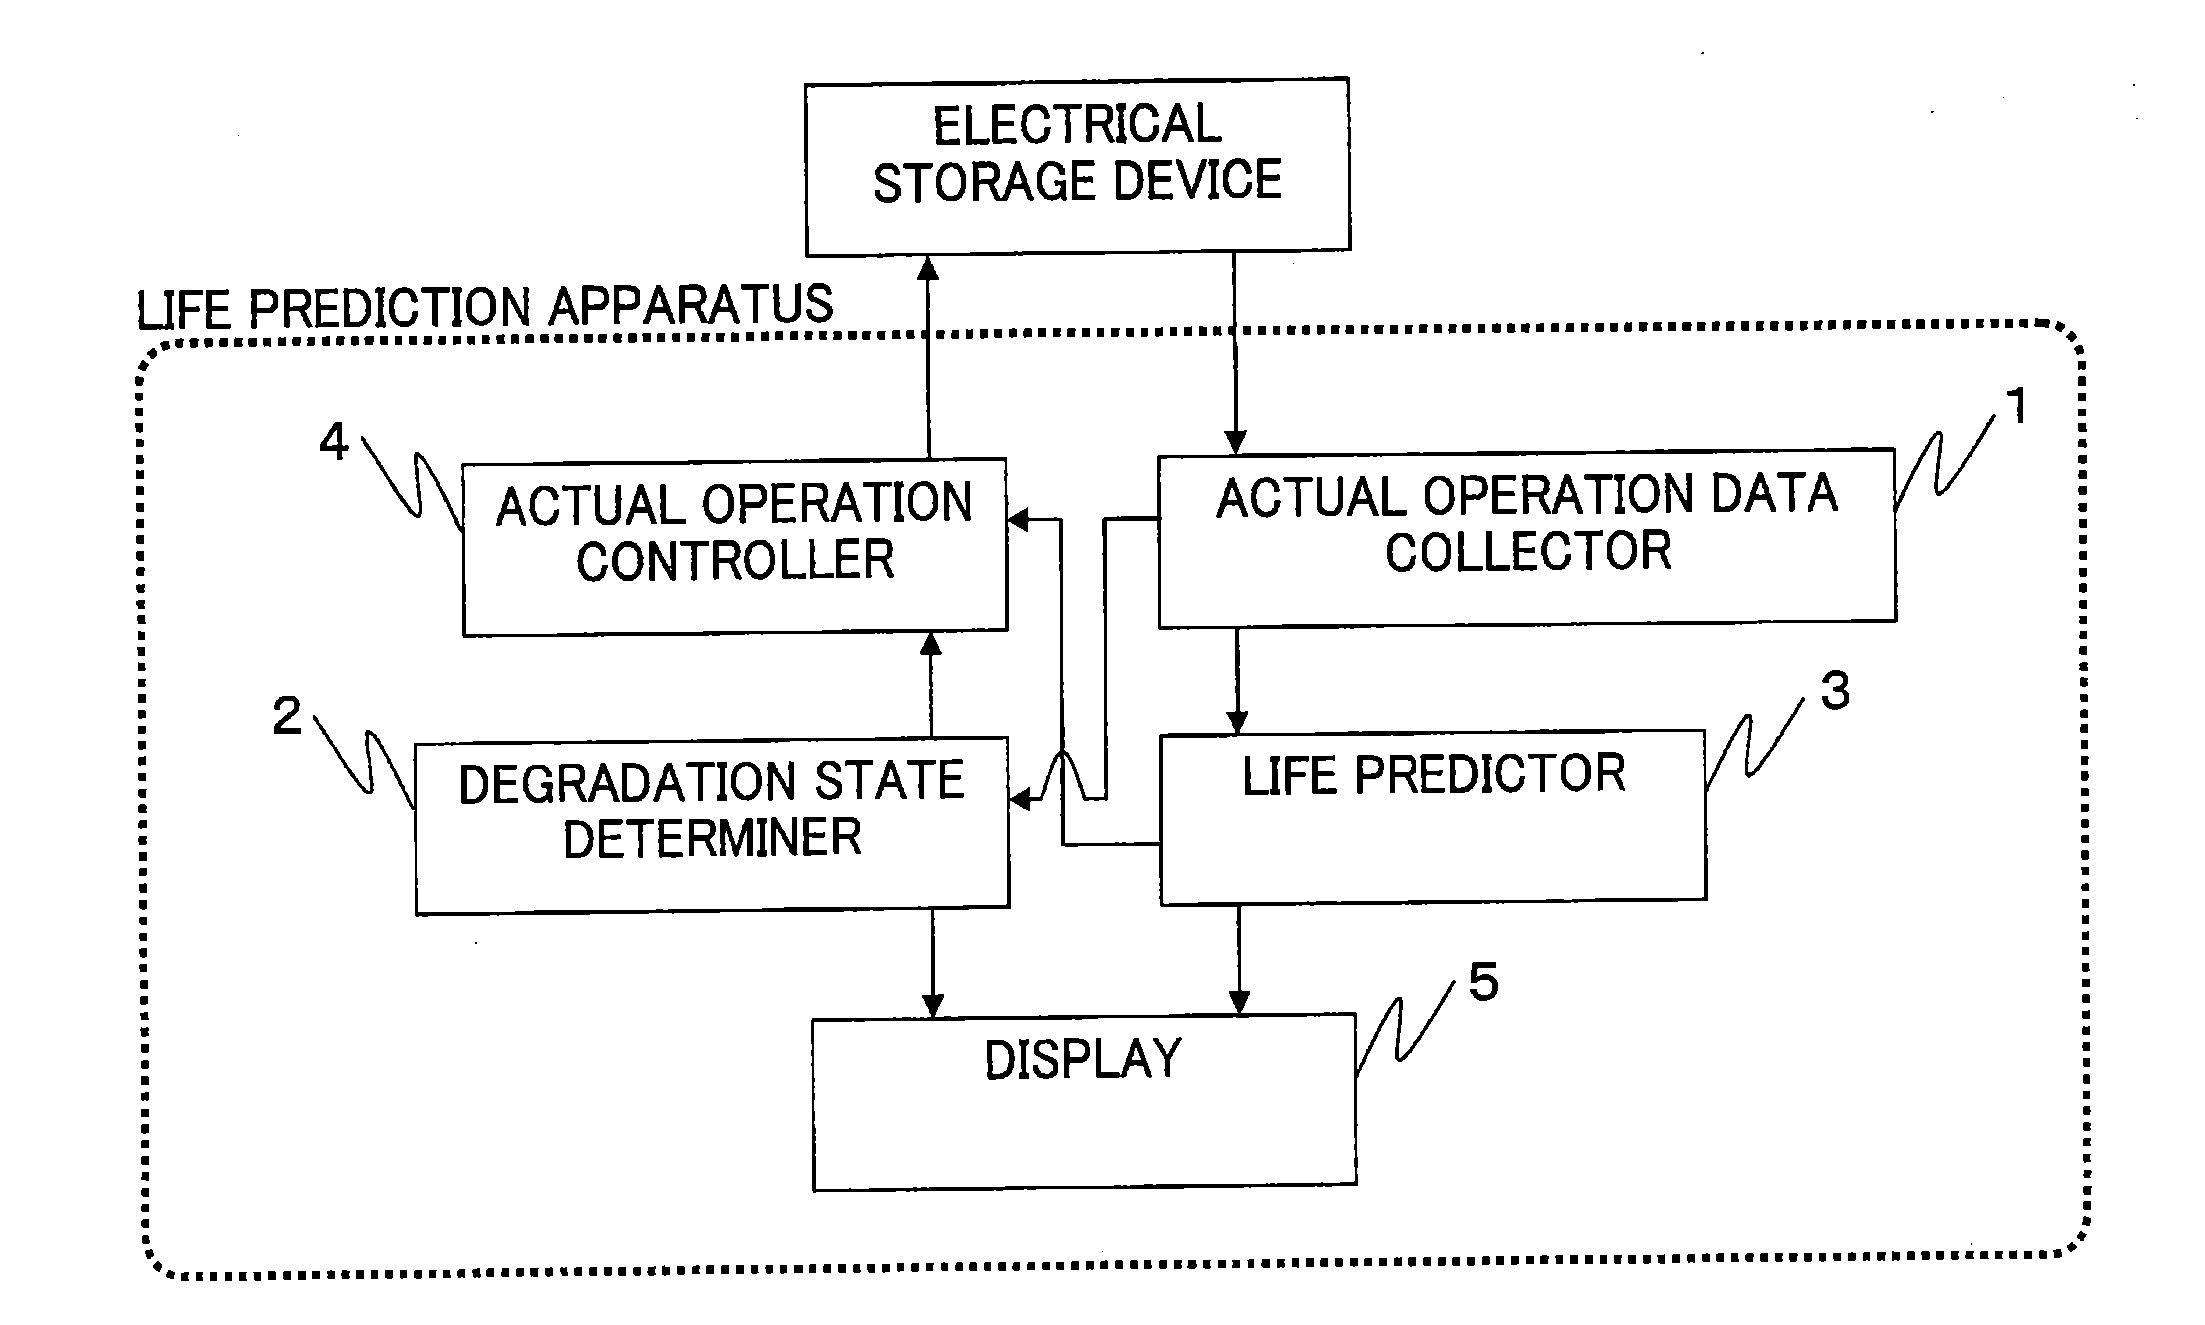 Life prediction apparatus for electrical storage device and life prediction method for electrical storage device